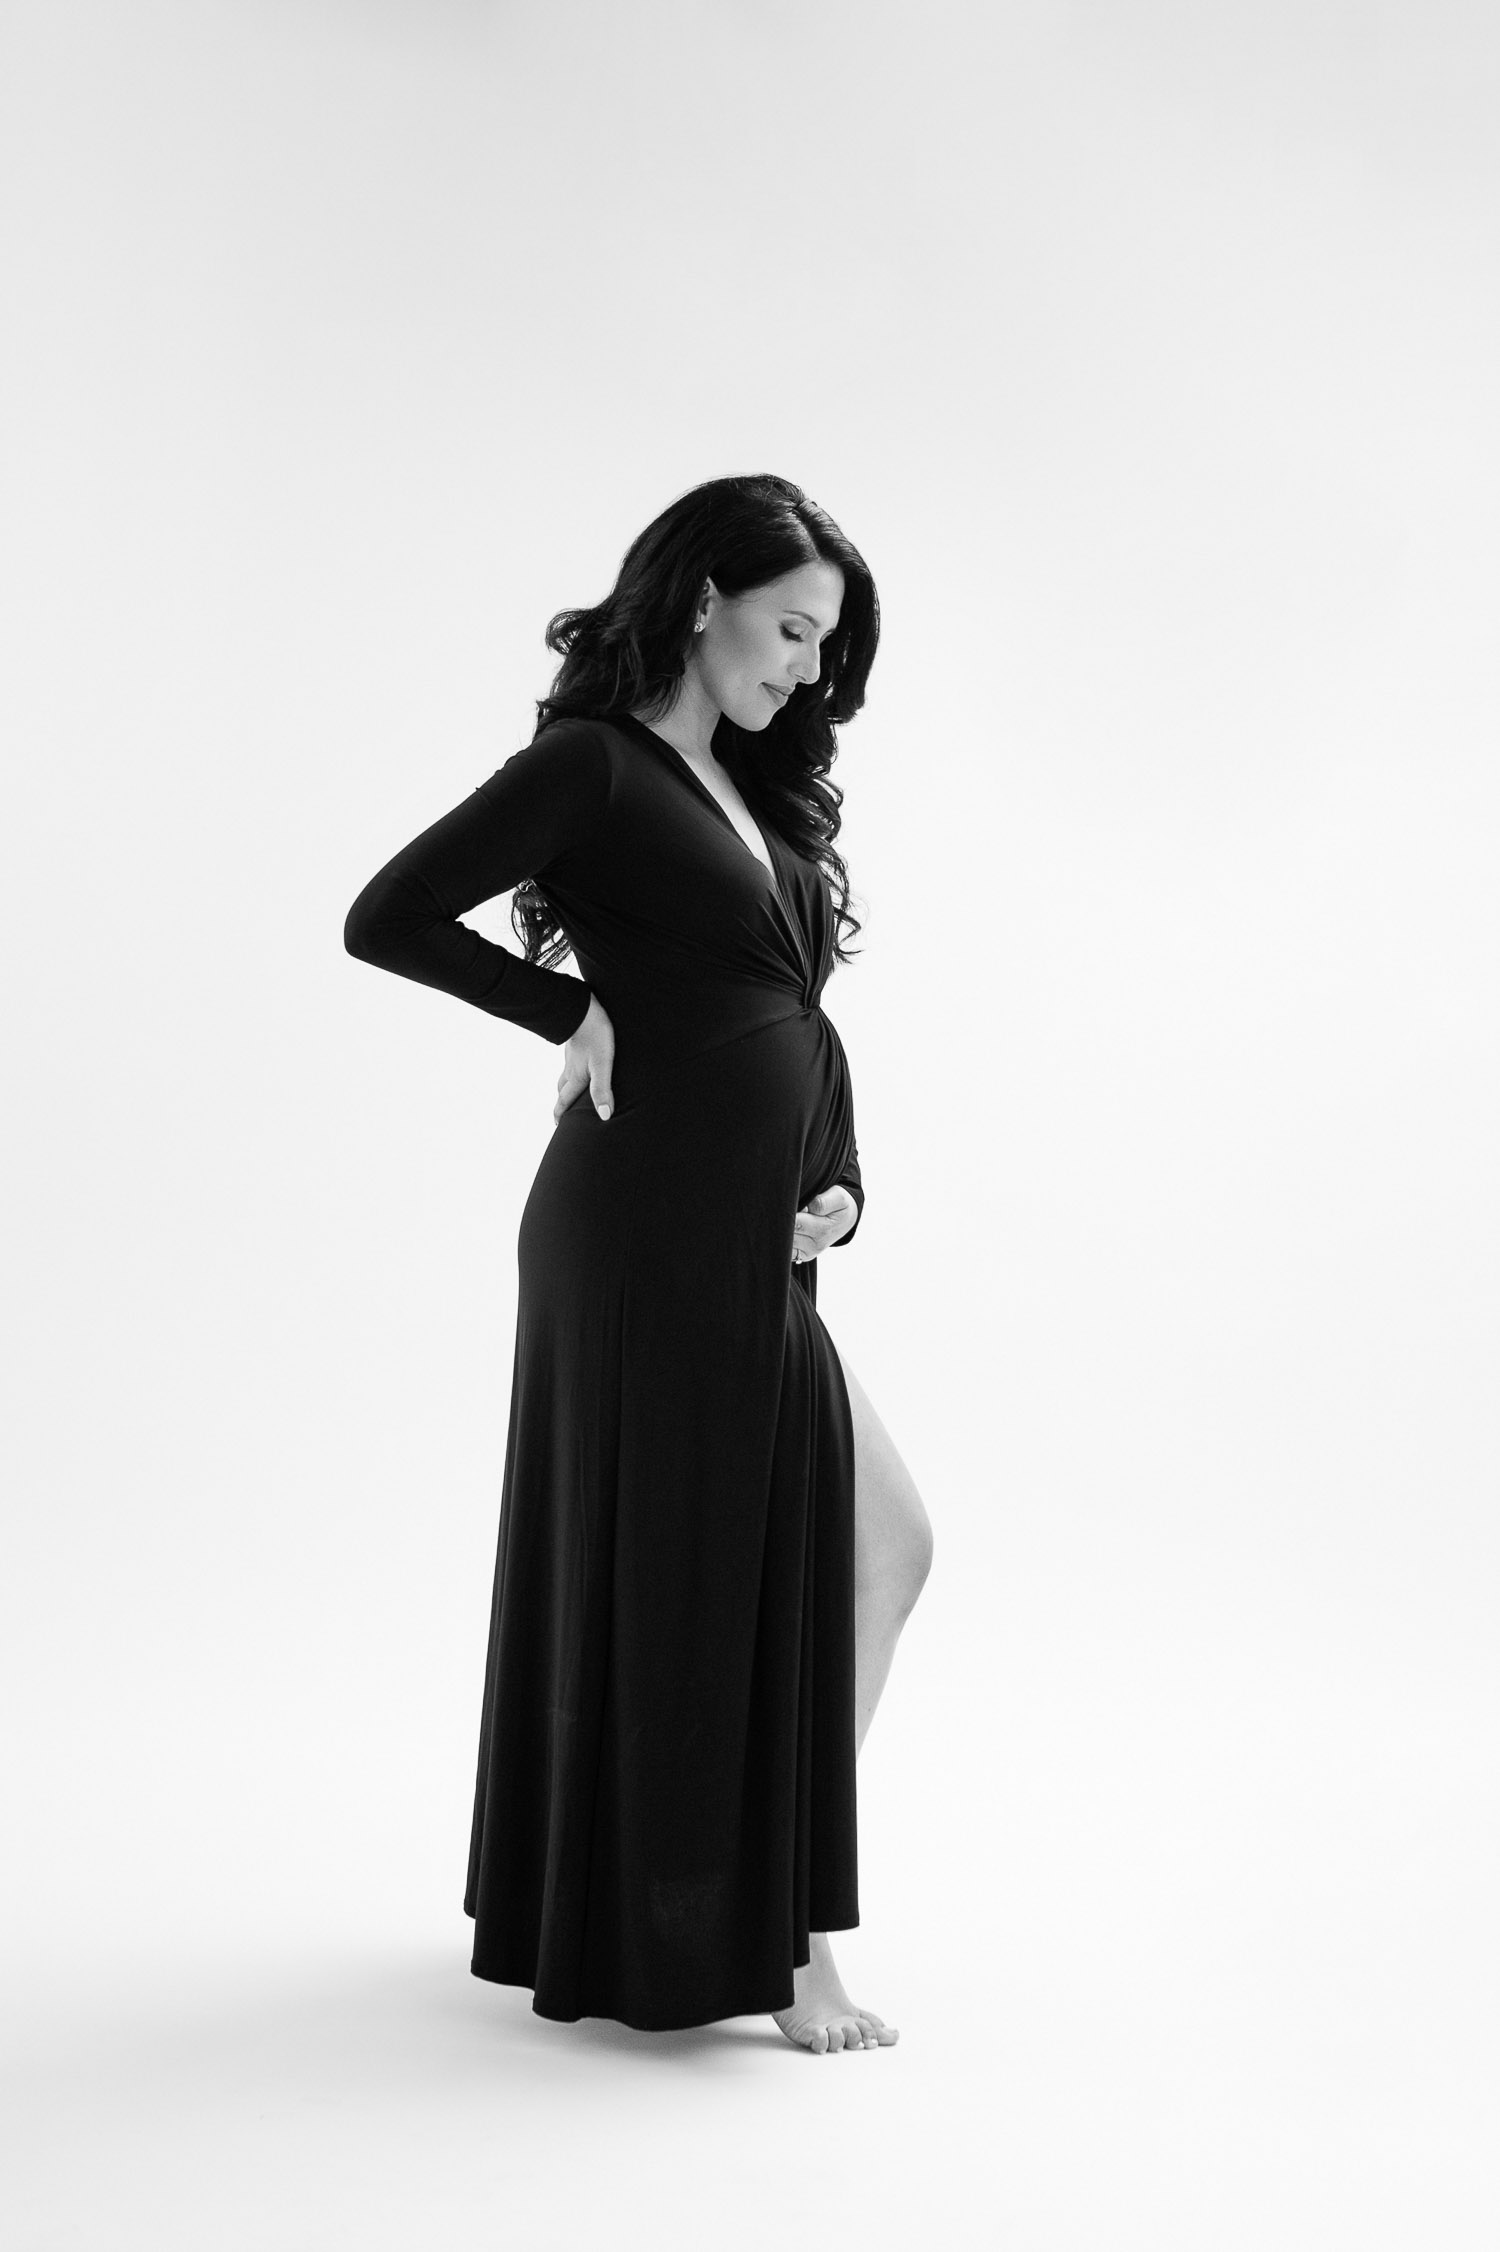 Black and white maternity photography